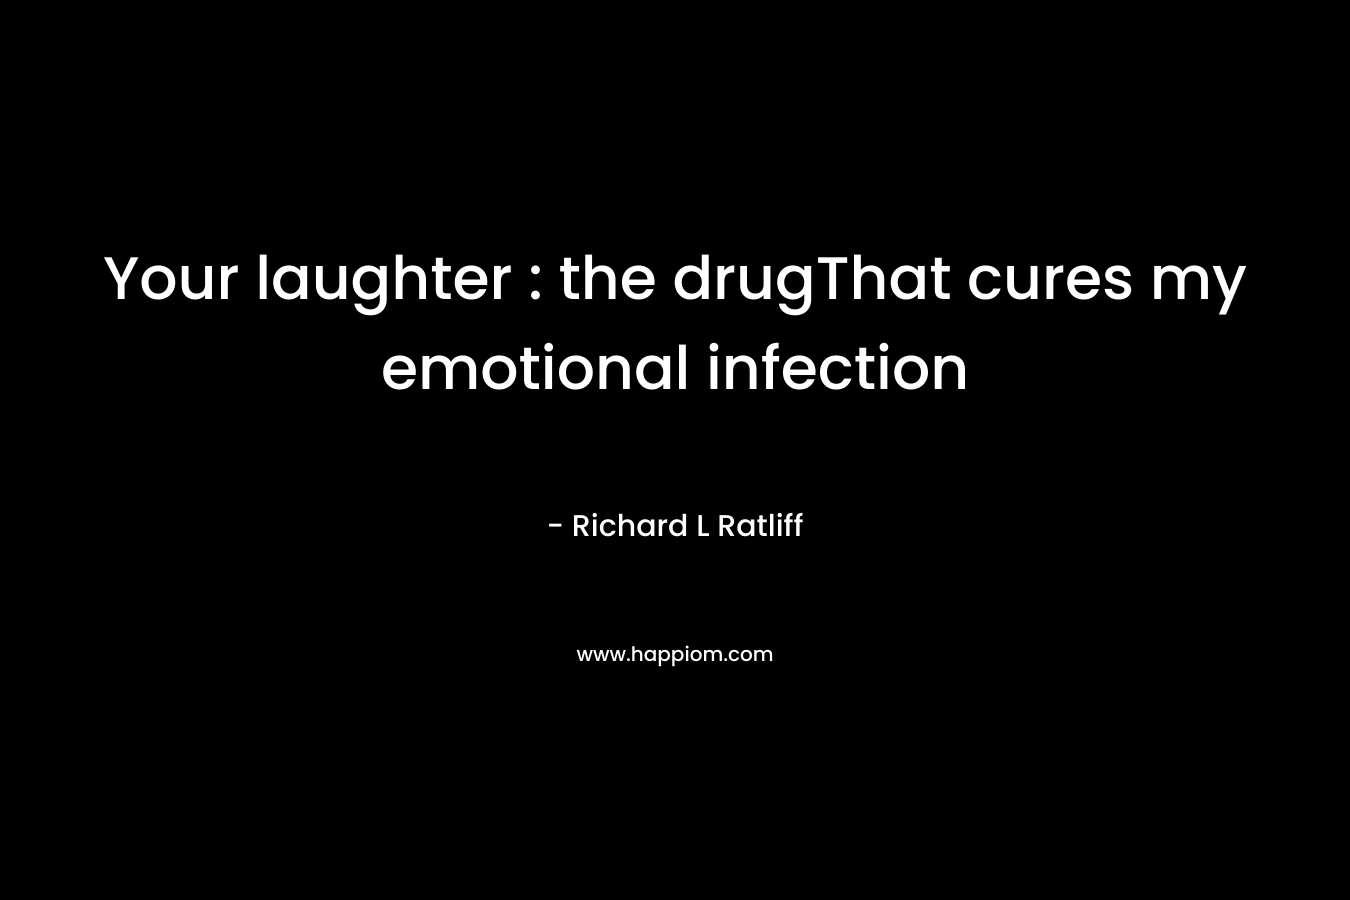 Your laughter : the drugThat cures my emotional infection